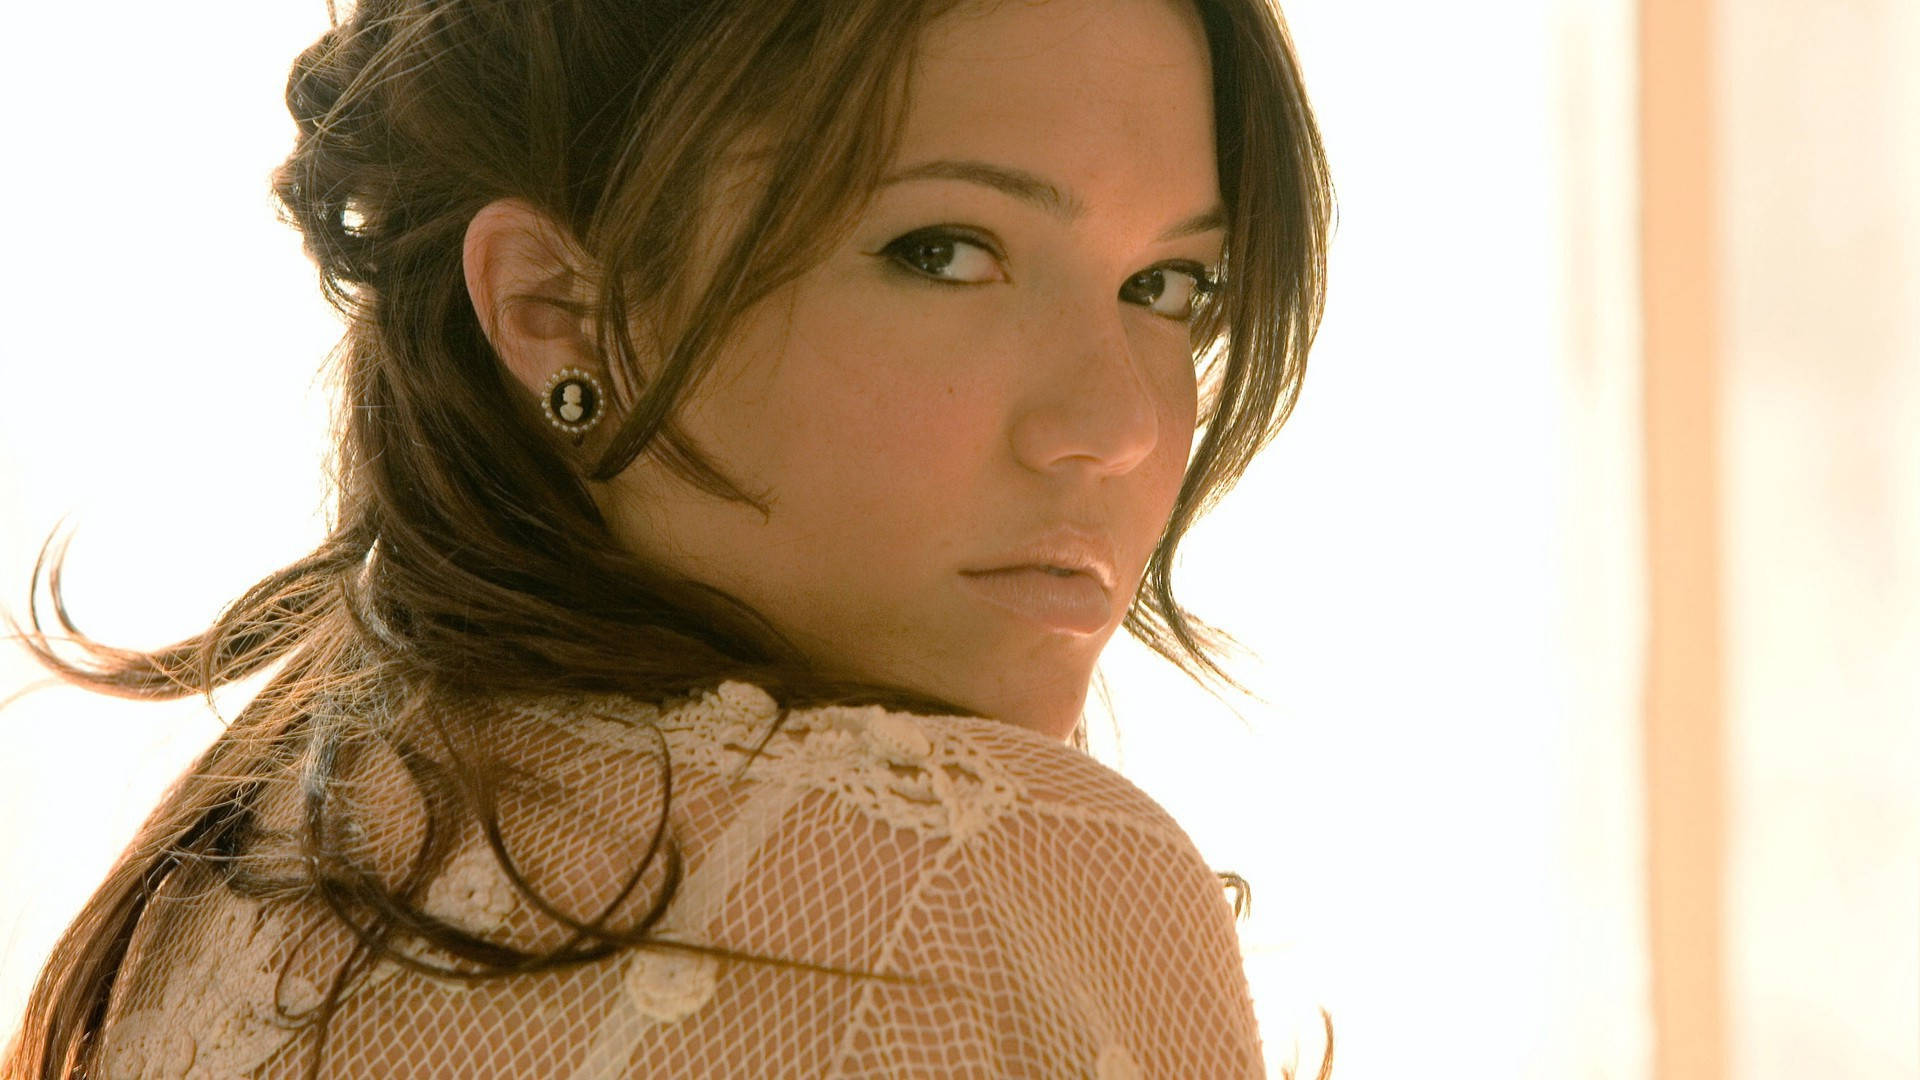 Free Mandy Moore Wallpaper Downloads, [100+] Mandy Moore Wallpapers for  FREE 